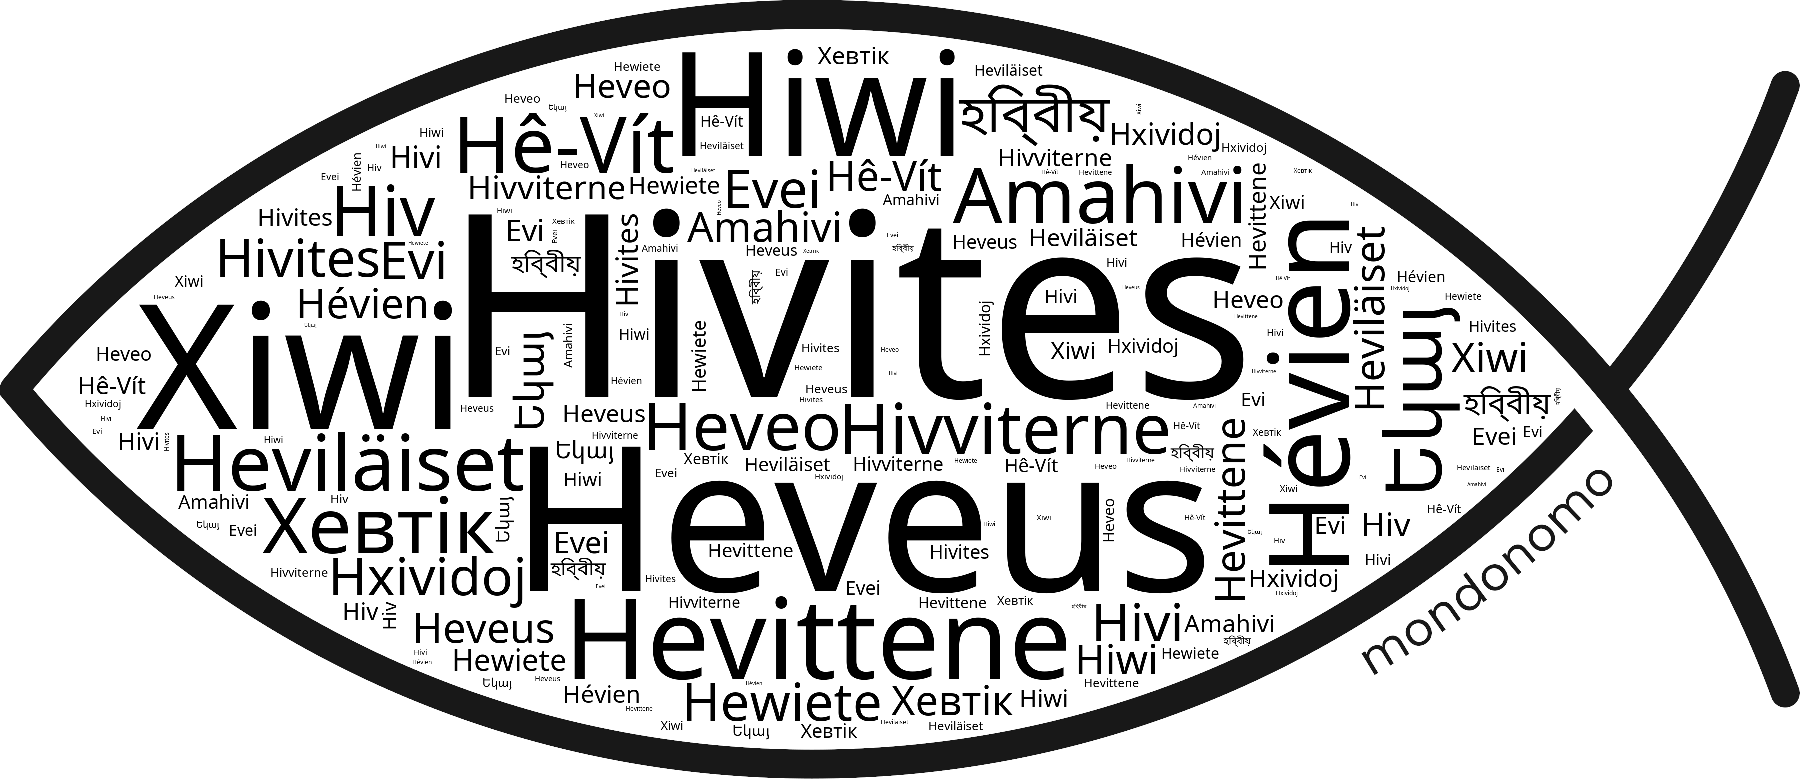 Name Hivites in the world's Bibles